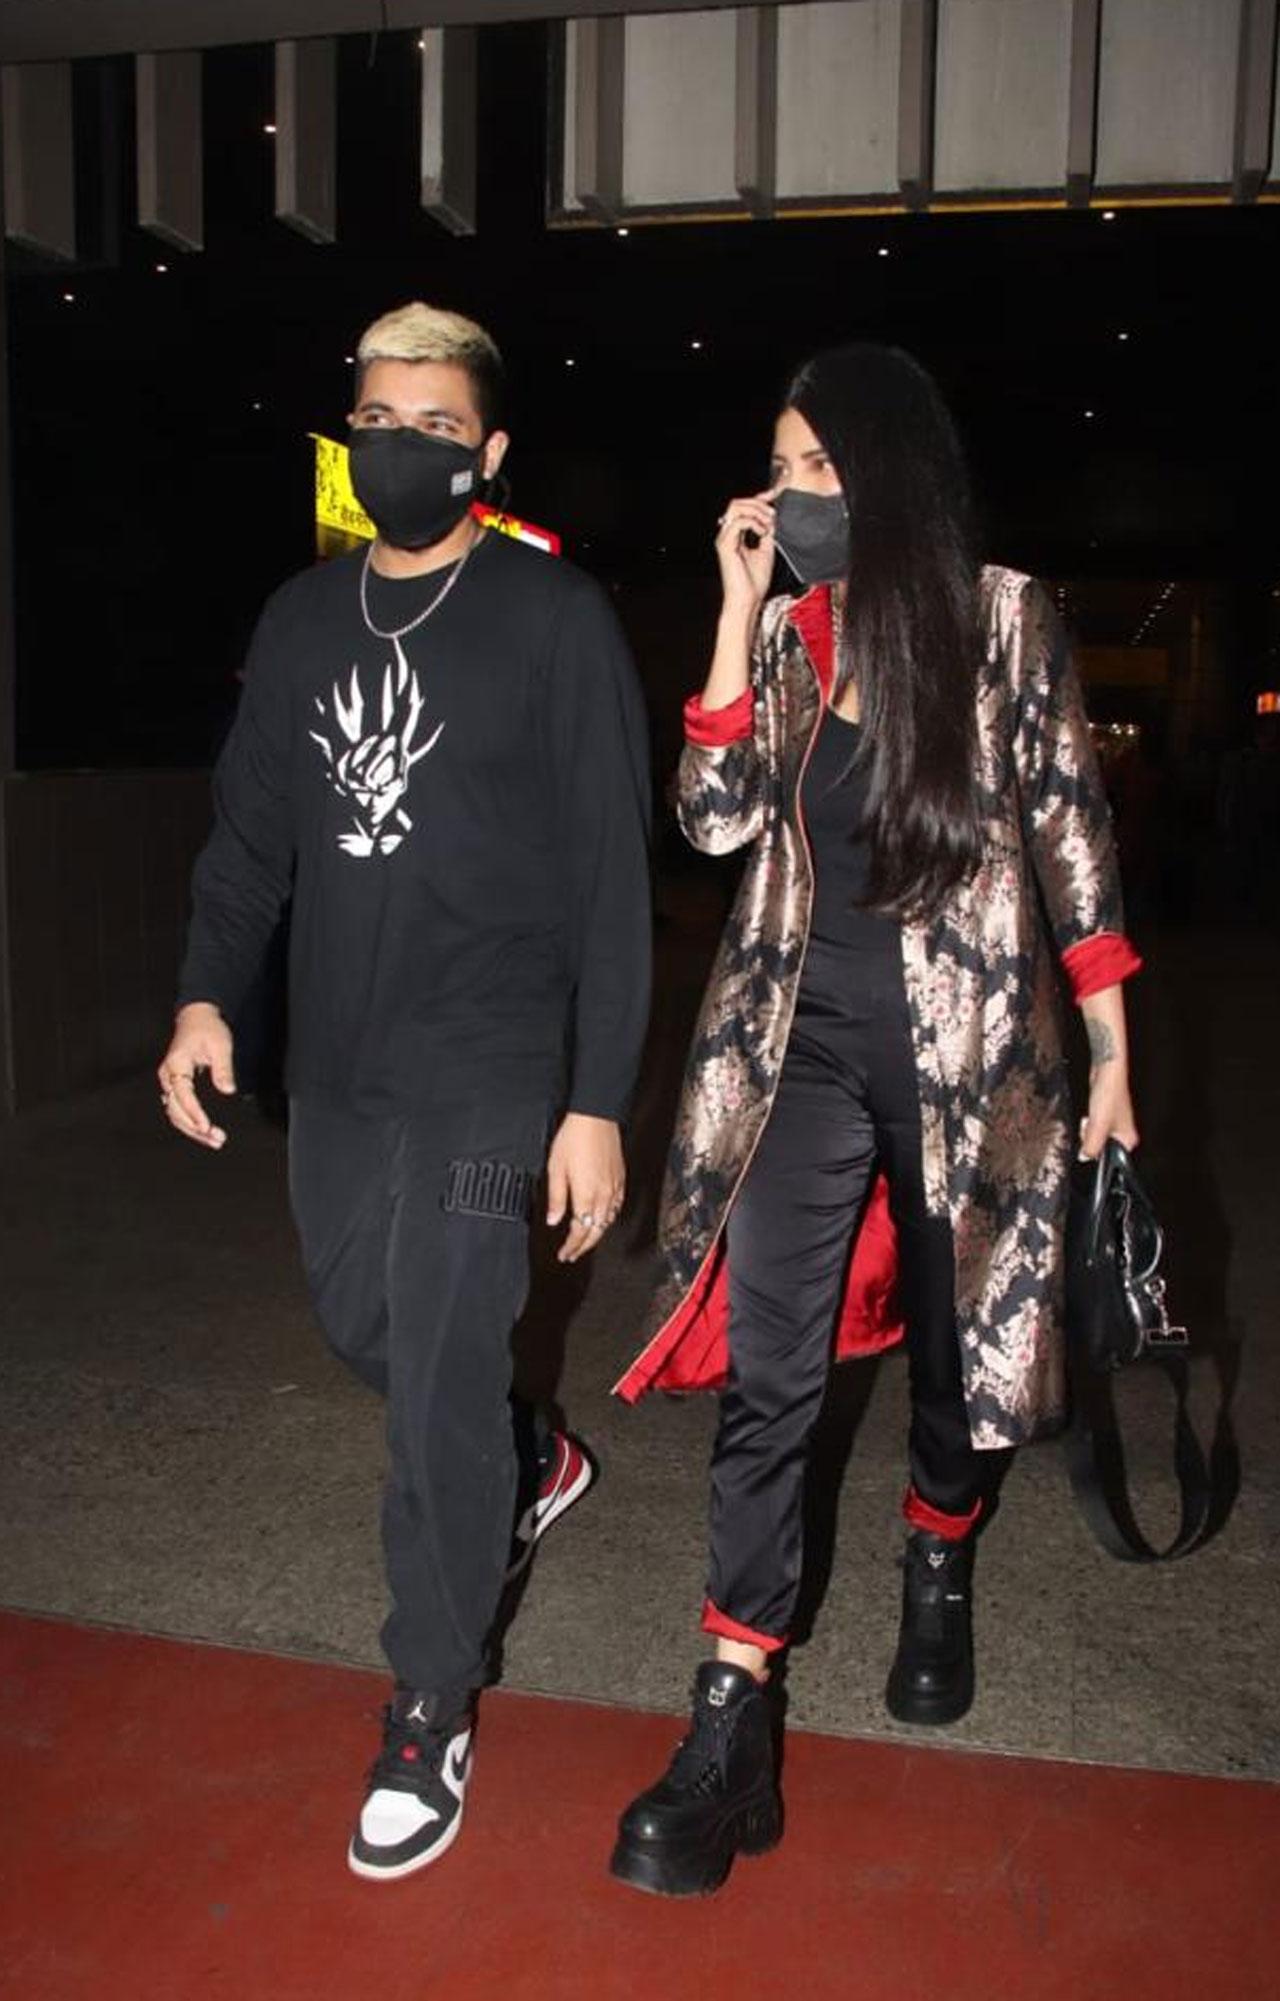 Shruti Haasan doesn’t shy away from talking about her relationship or introducing her man to the media. She has already. The man is Santanu Hazarika and the couple is often spotted together and was recently seen at the airport again.